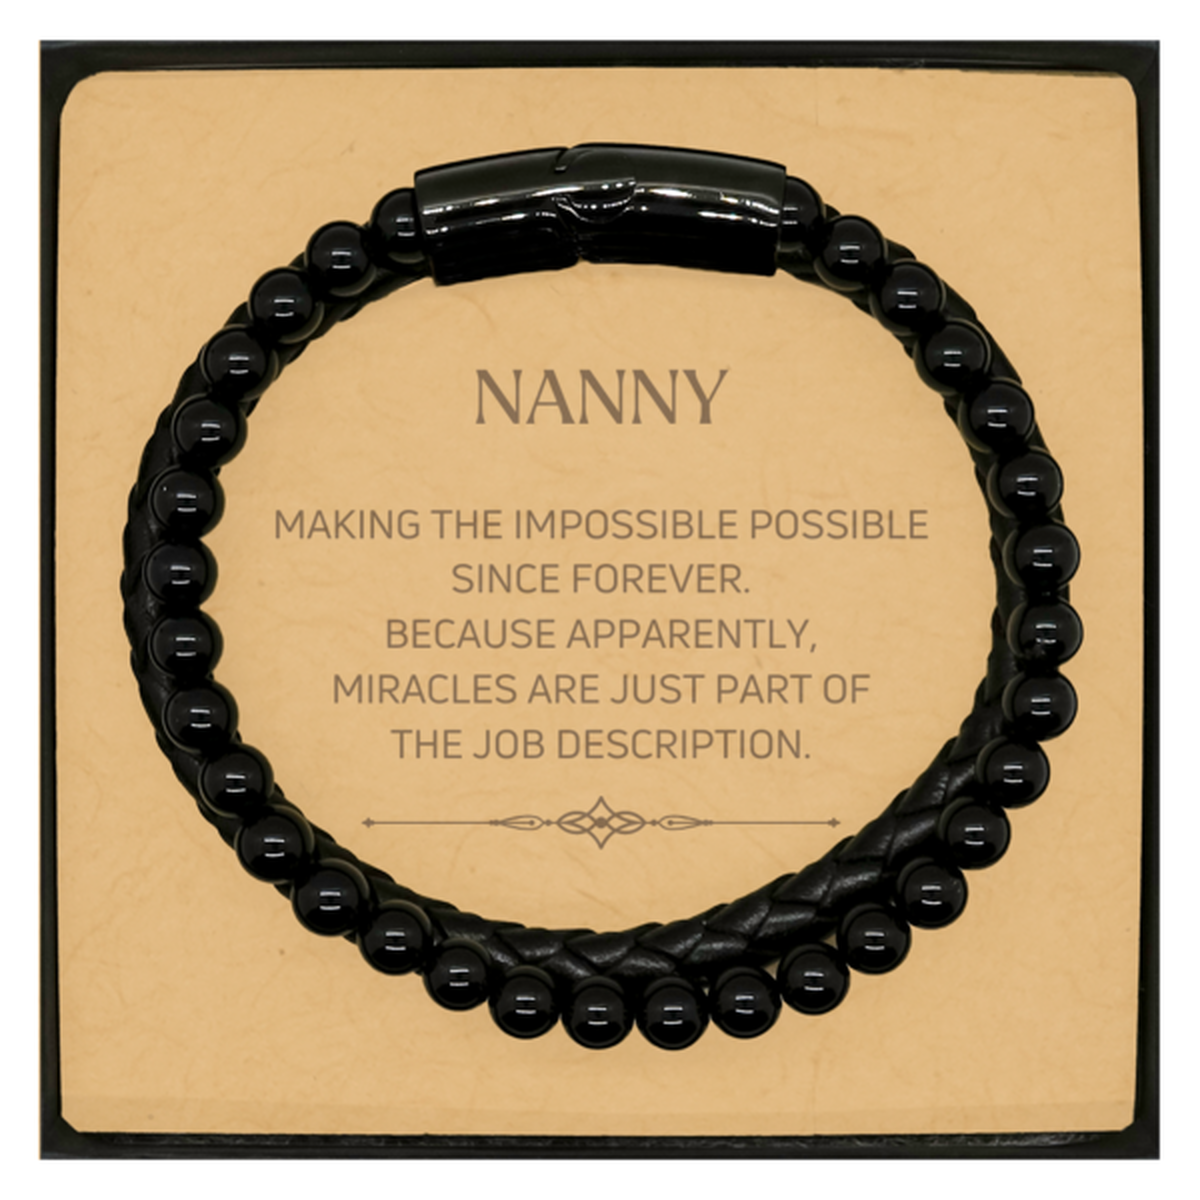 Funny Nanny Gifts, Miracles are just part of the job description, Inspirational Birthday Christmas Stone Leather Bracelets For Nanny, Men, Women, Coworkers, Friends, Boss